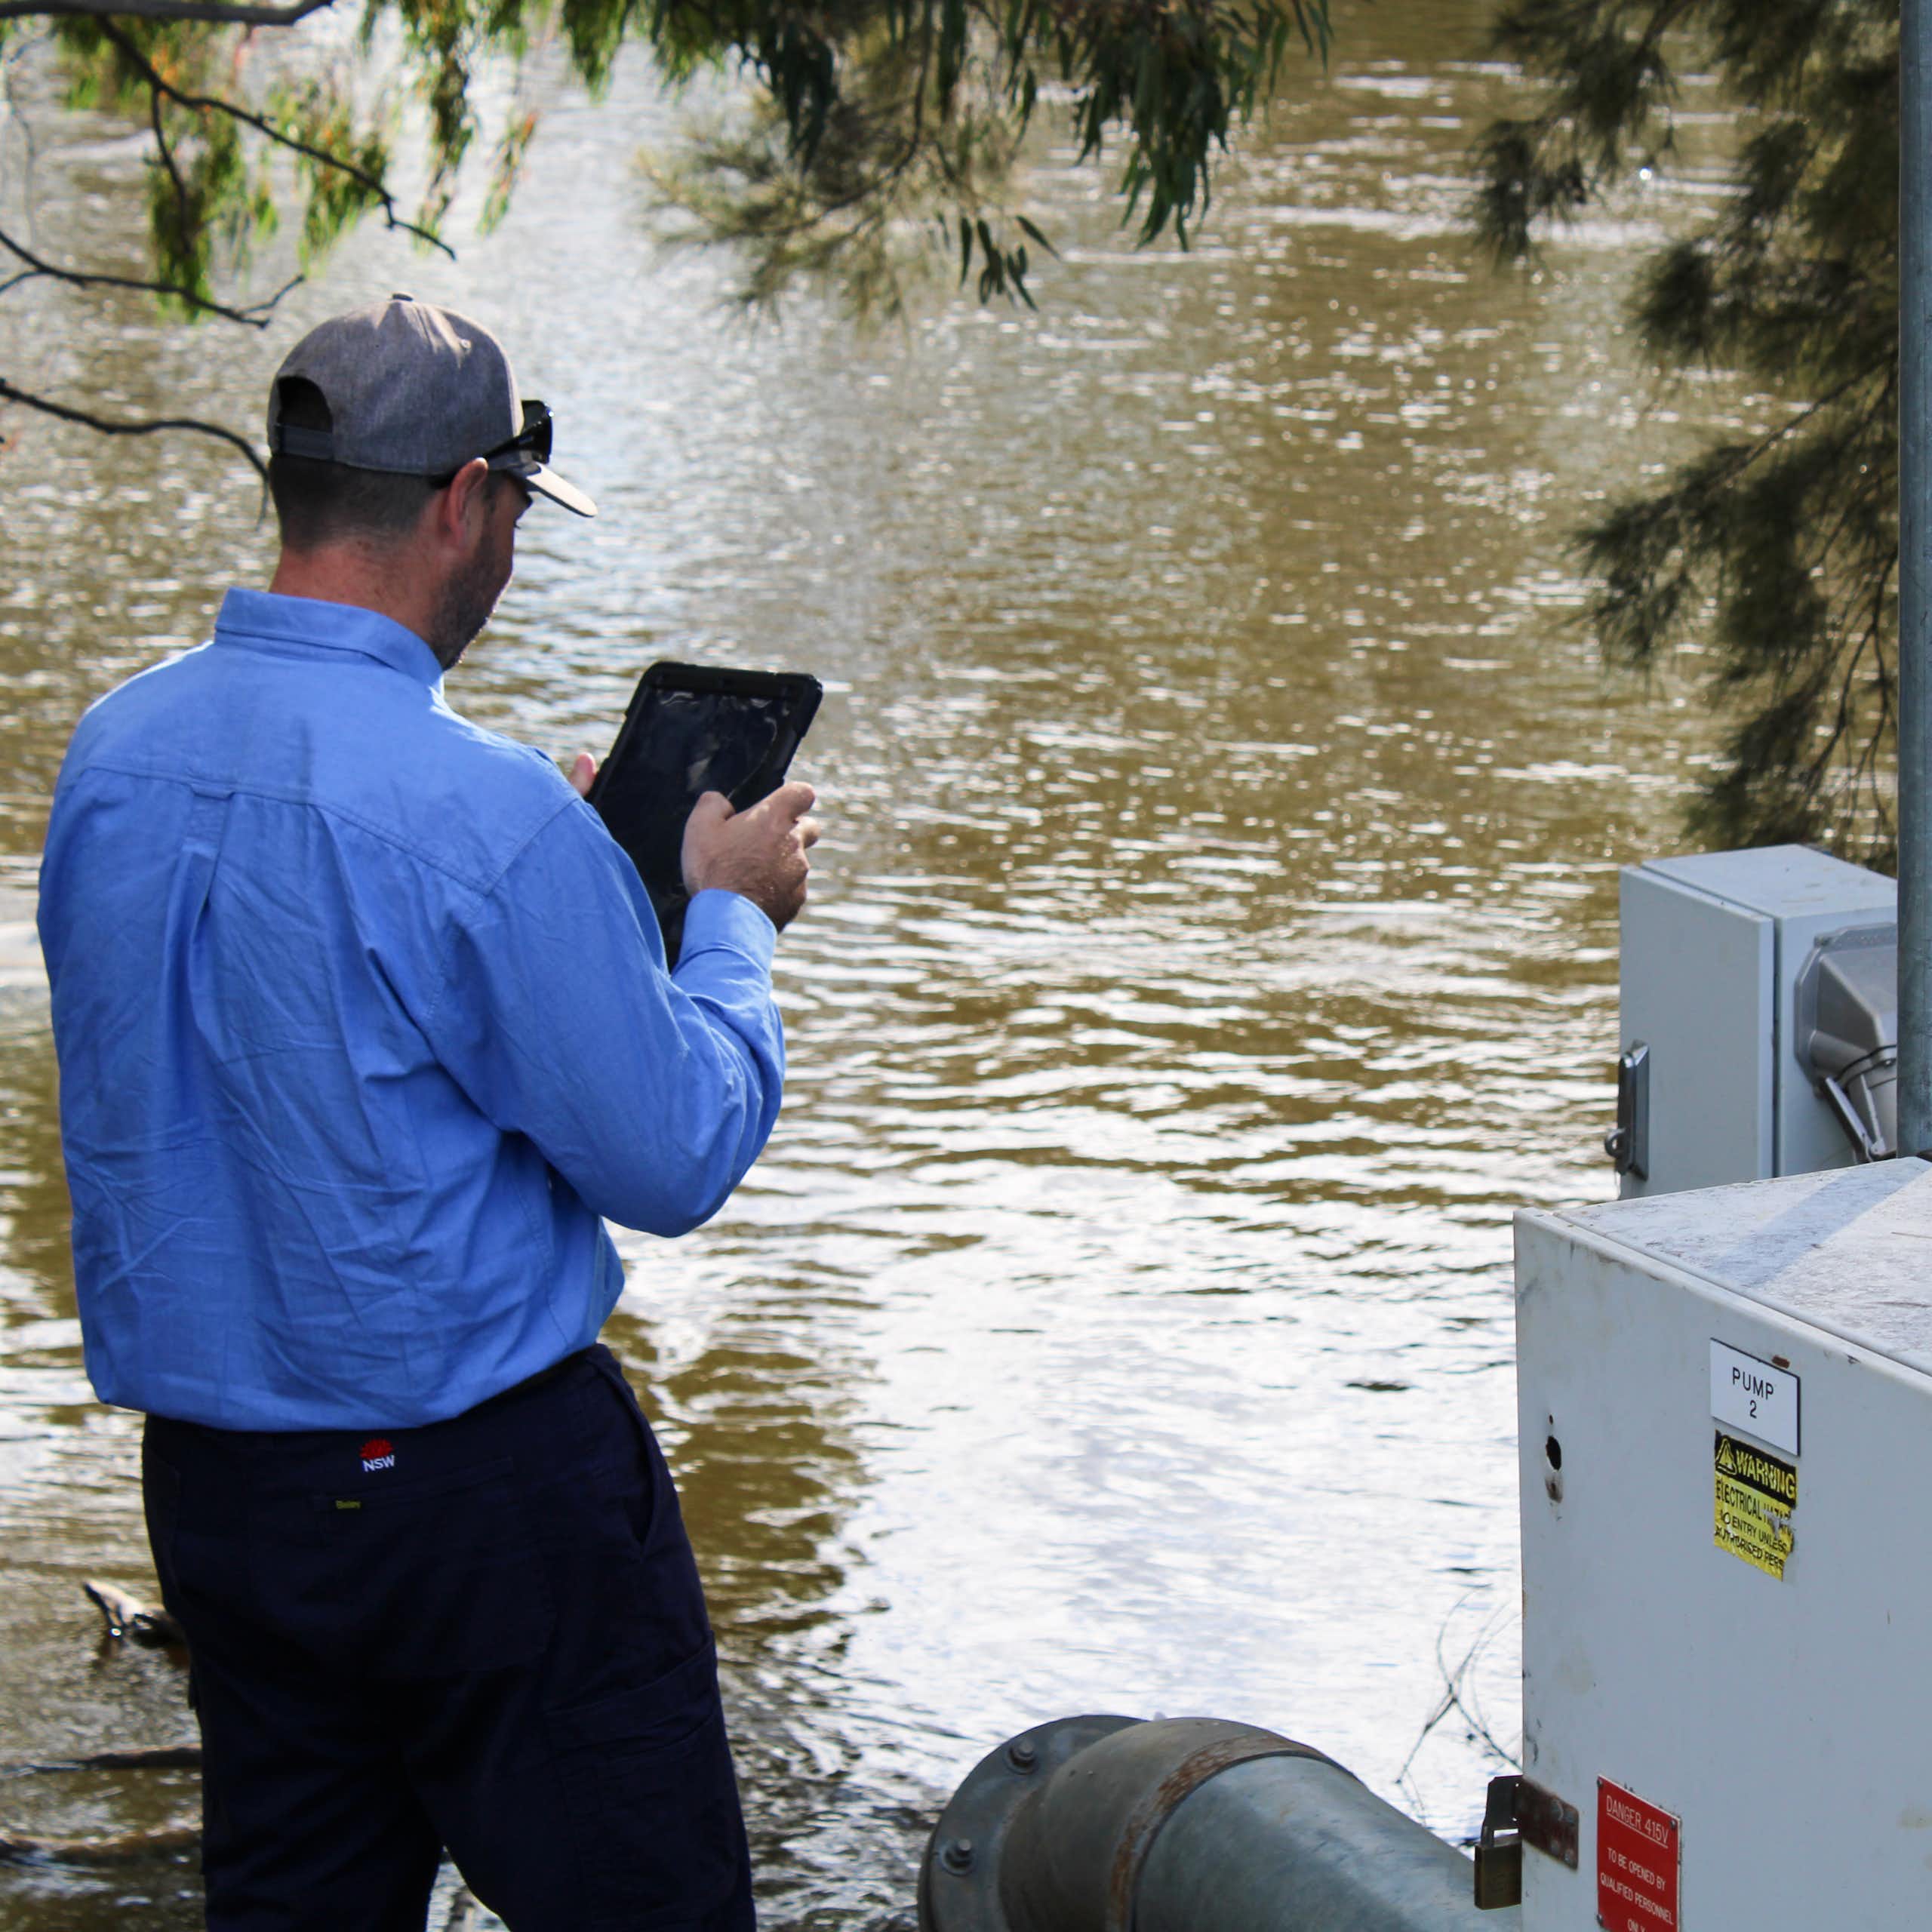 Rear view of a man inspecting an irrigation pump on a river